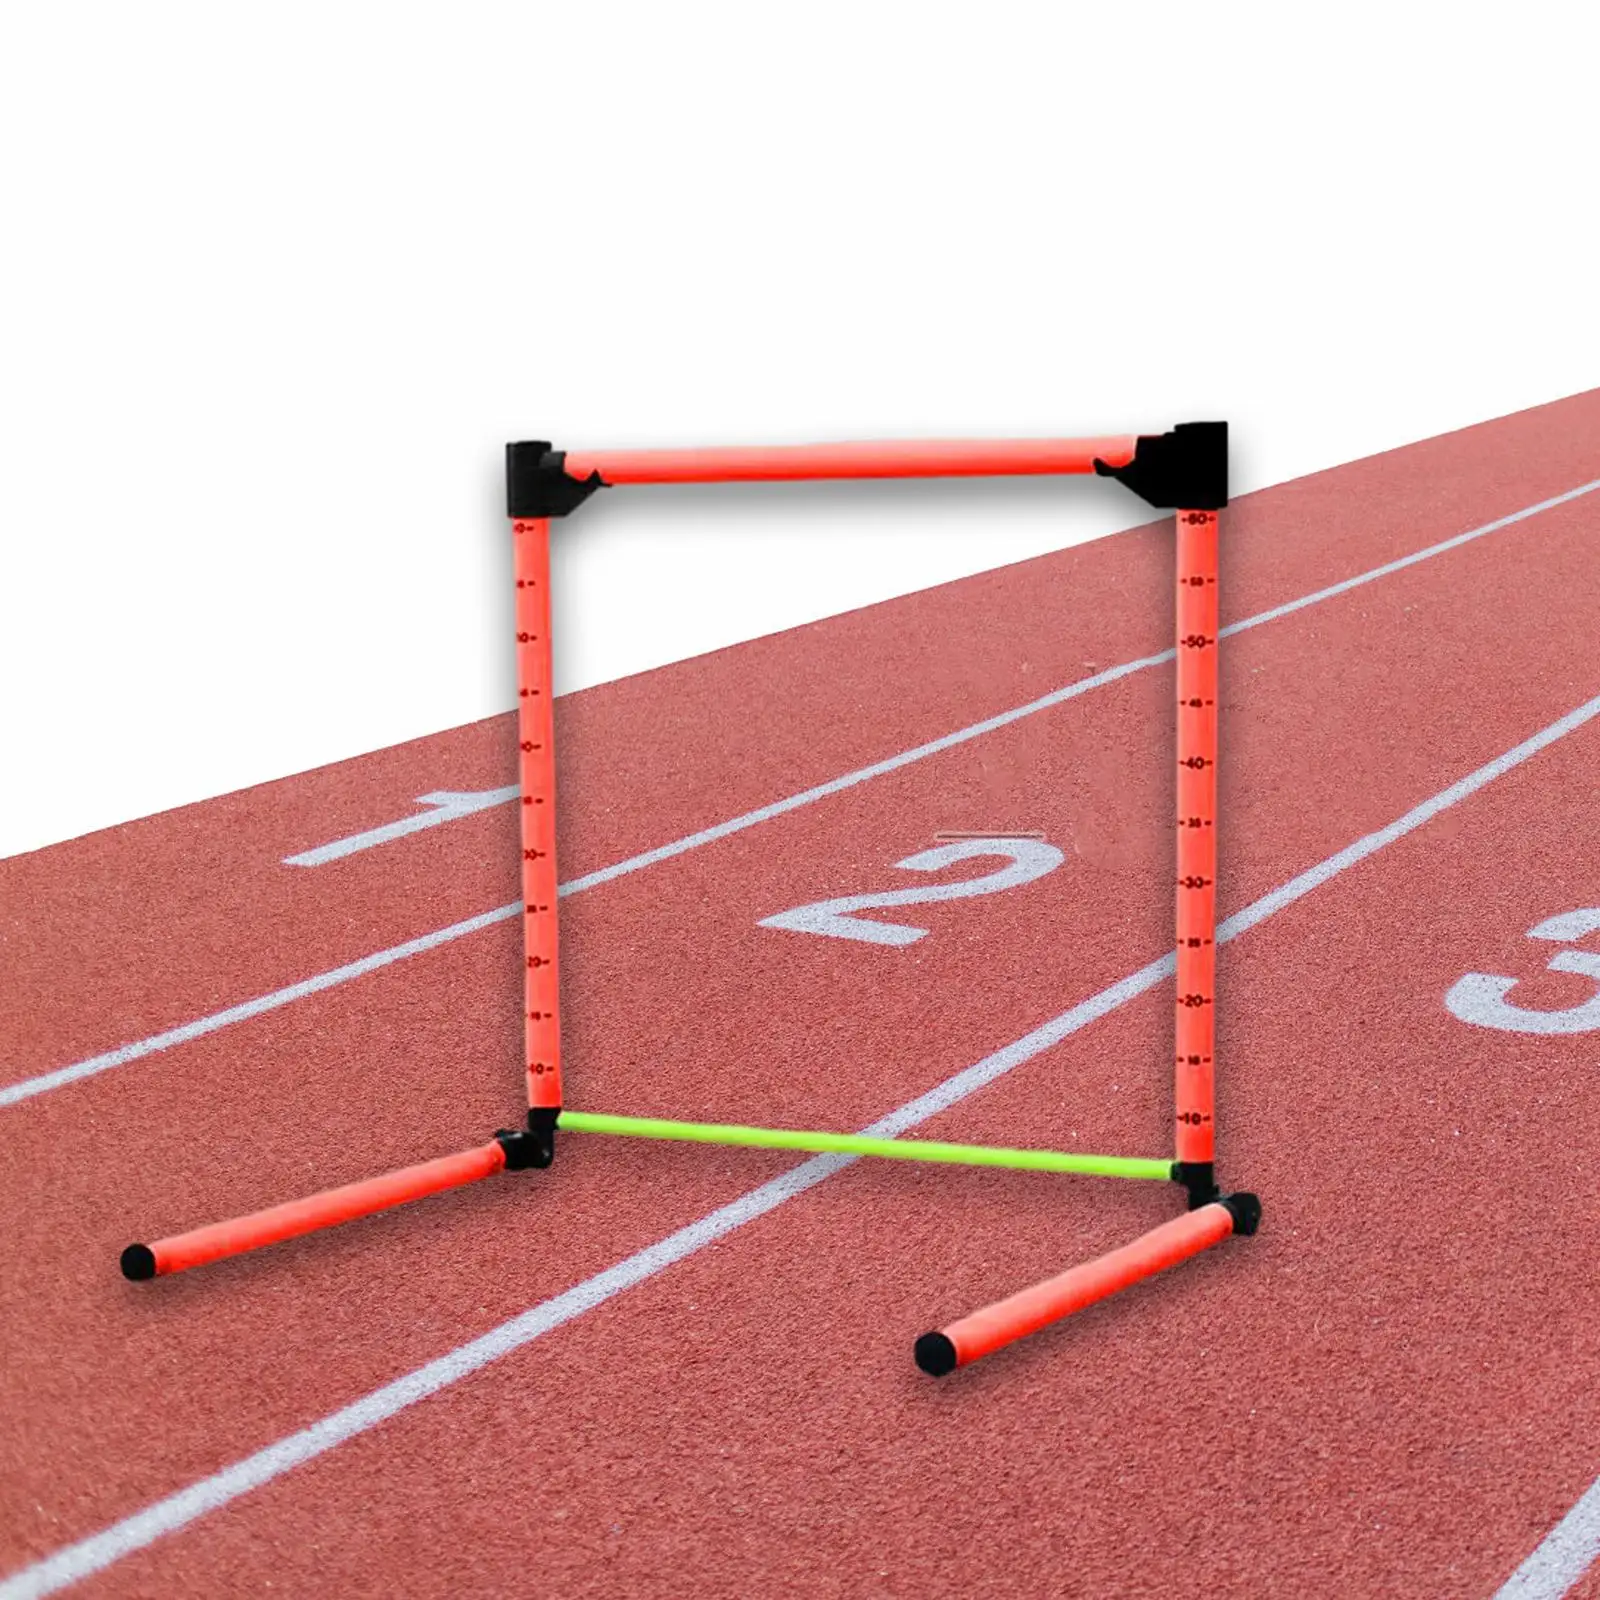 Agility Hurdles Improves Strength Coordination Fitness Adjustable Height for Baseball Basketball Football Soccer Exercise